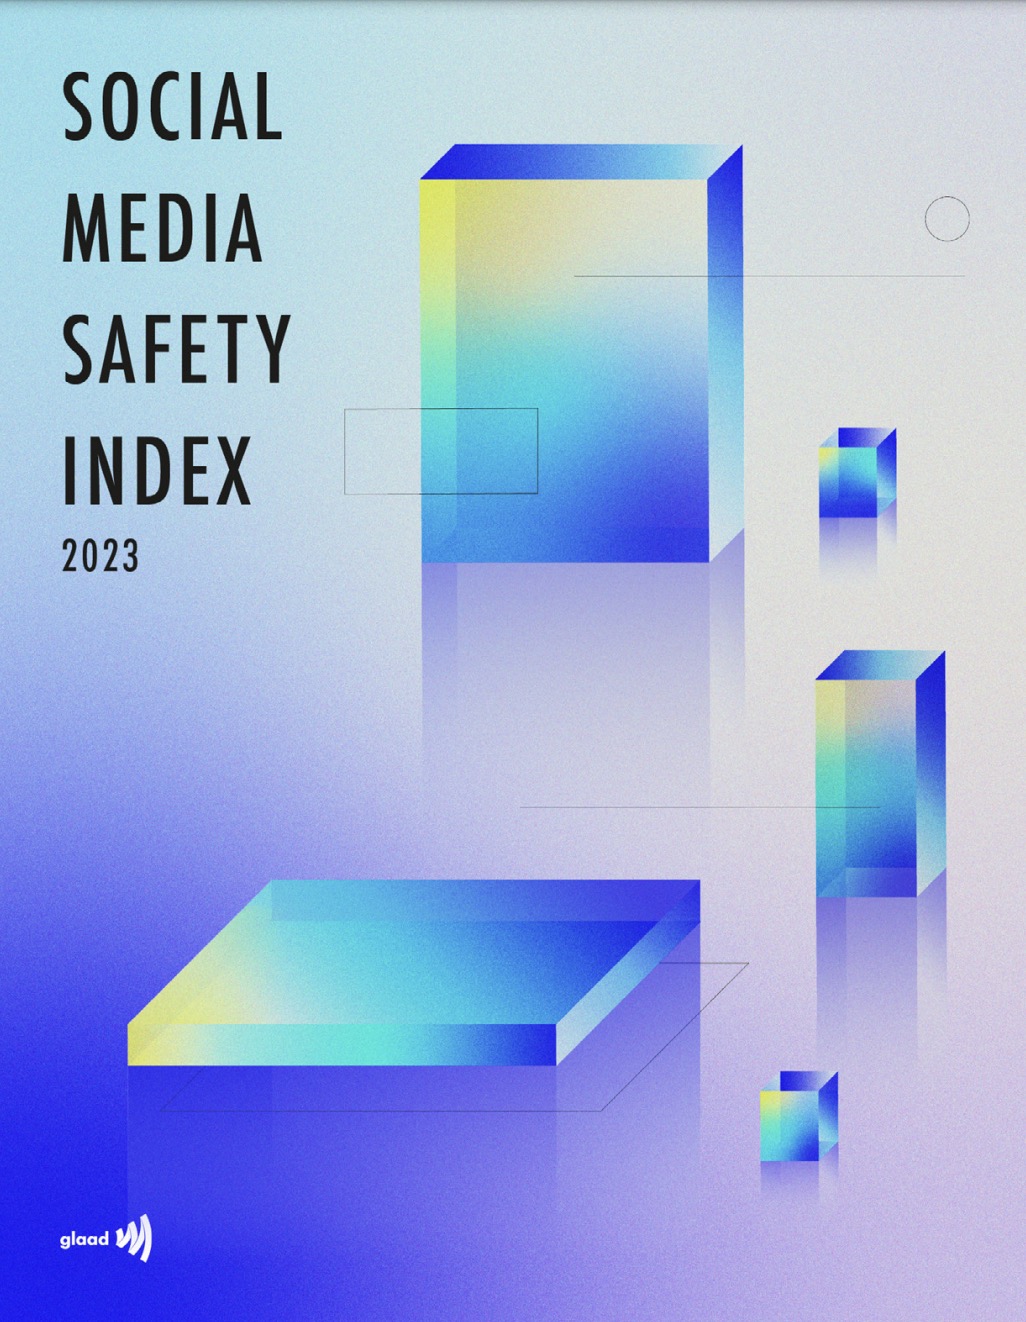 Explore the 2023 GLAAD Social Media Safety Index